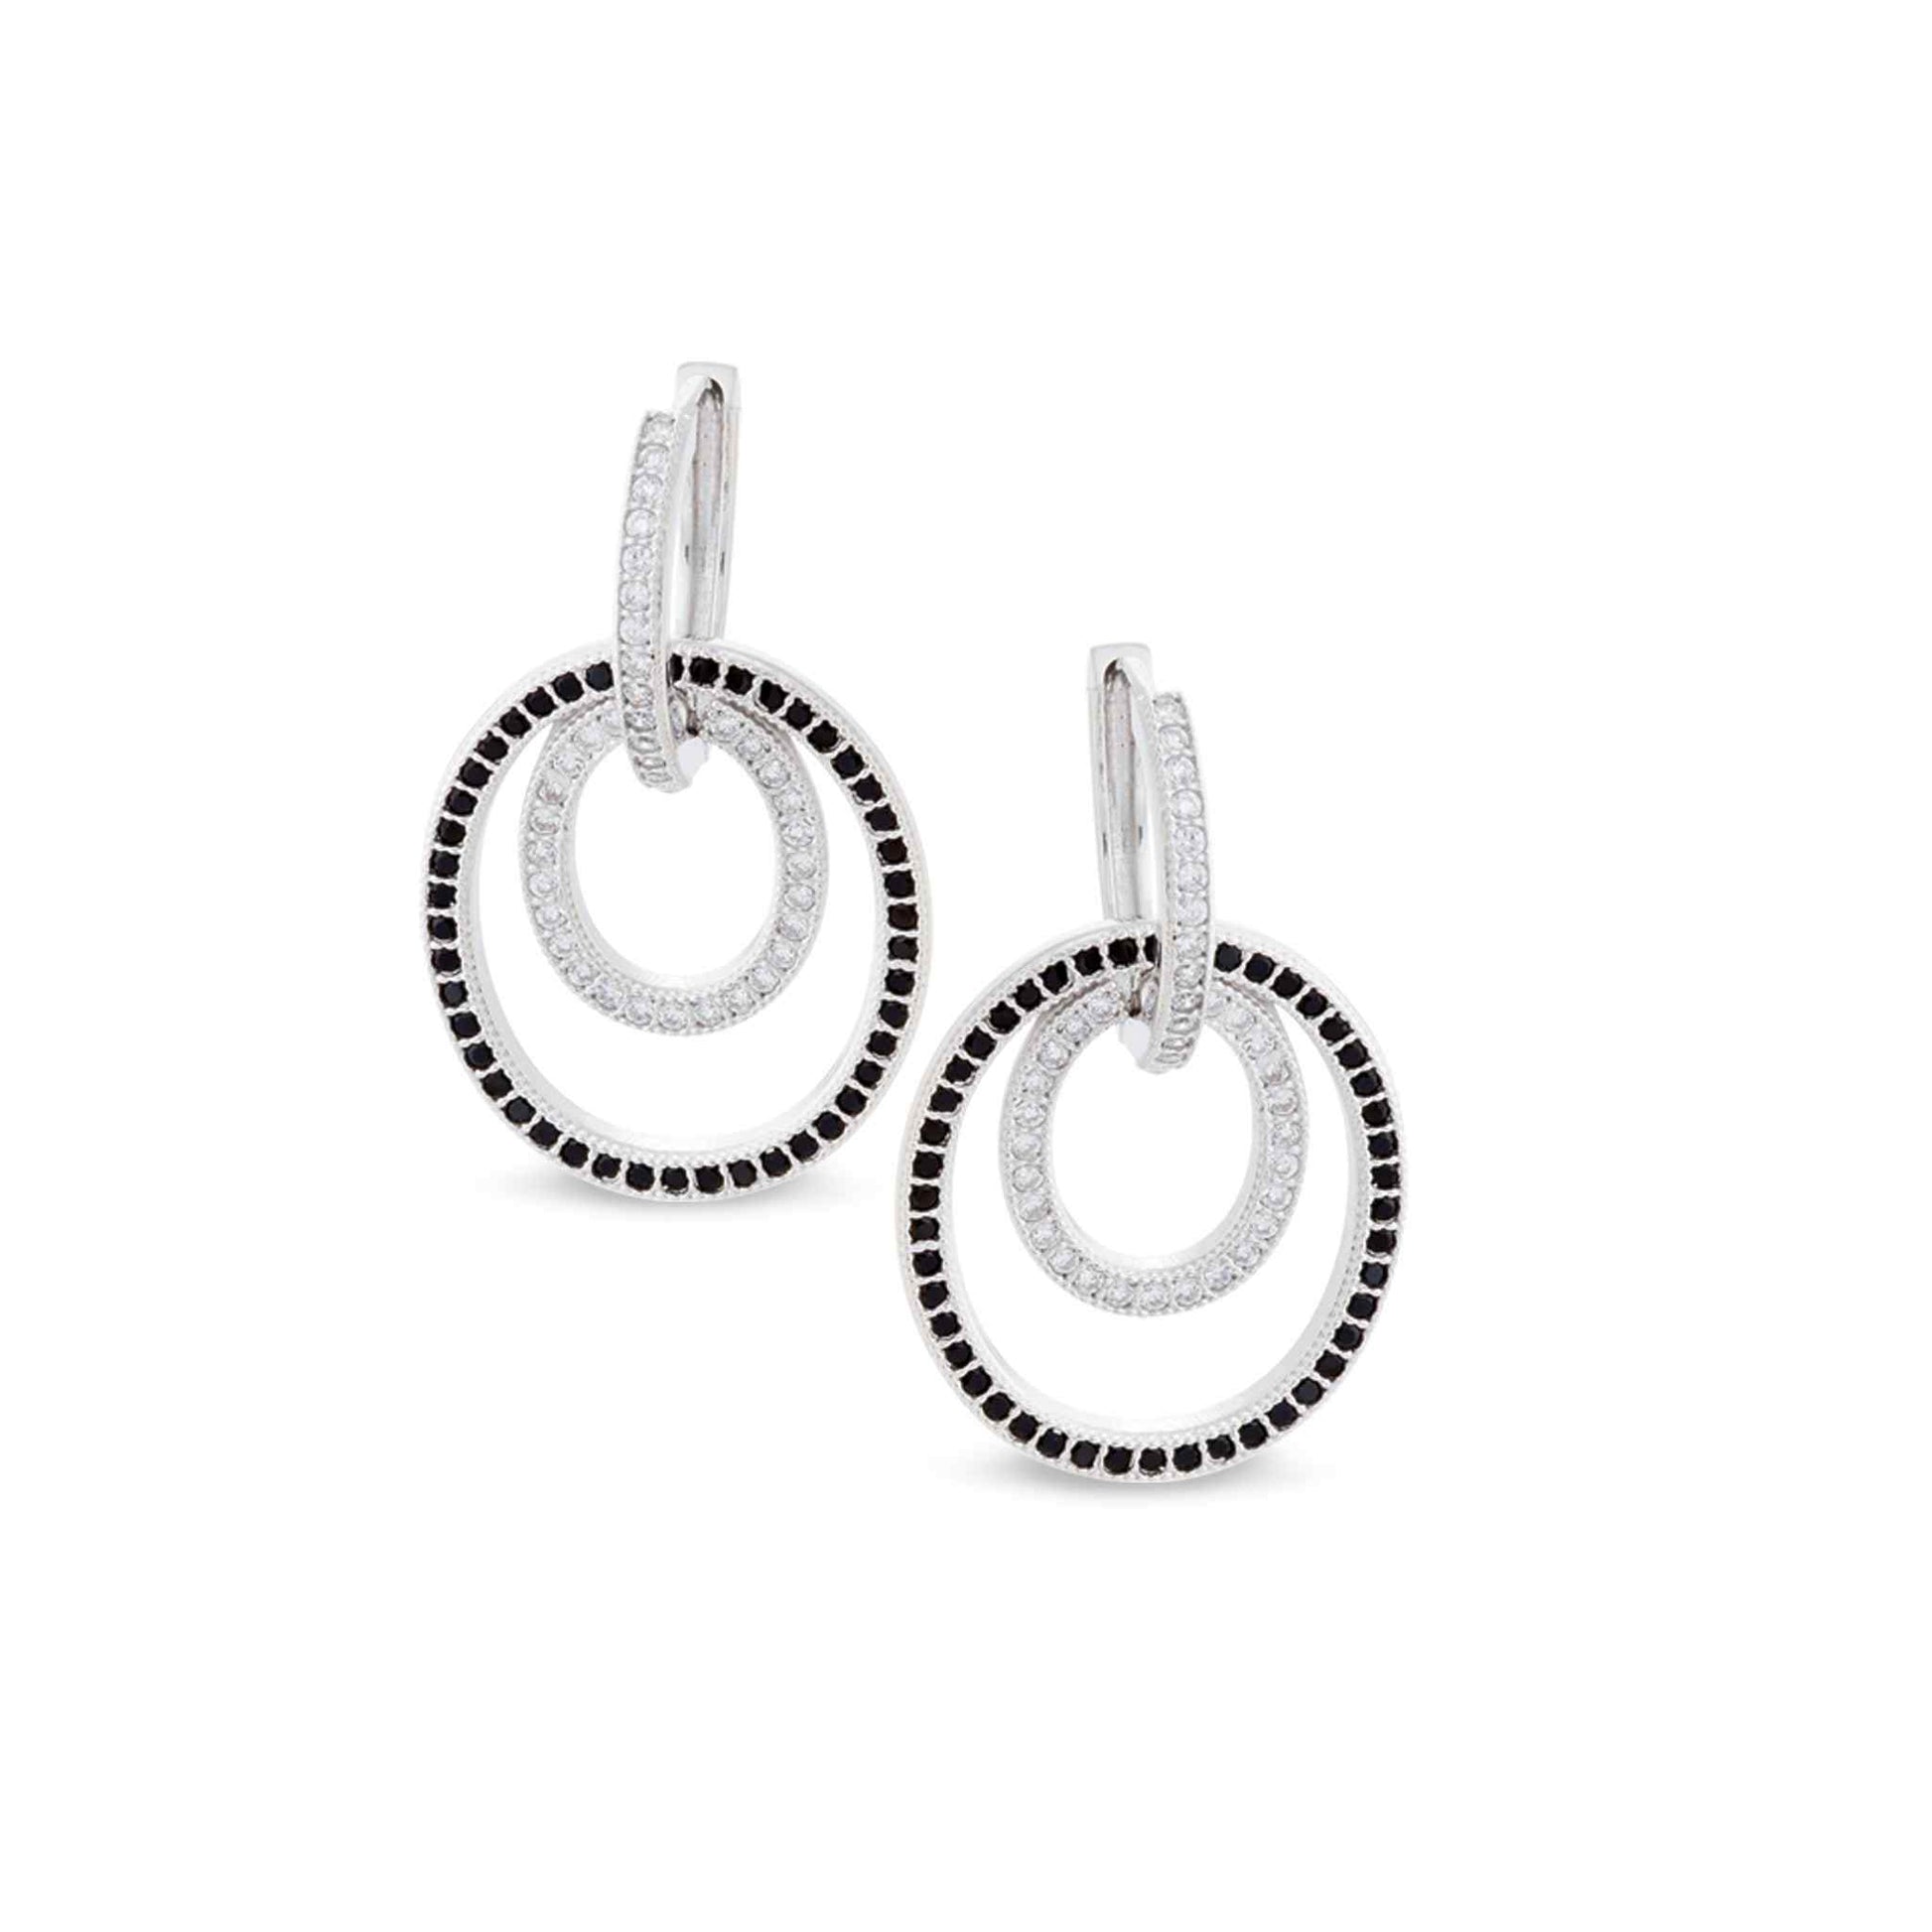 A black & white interlocking huggie earrings with simulated diamonds displayed on a neutral white background.